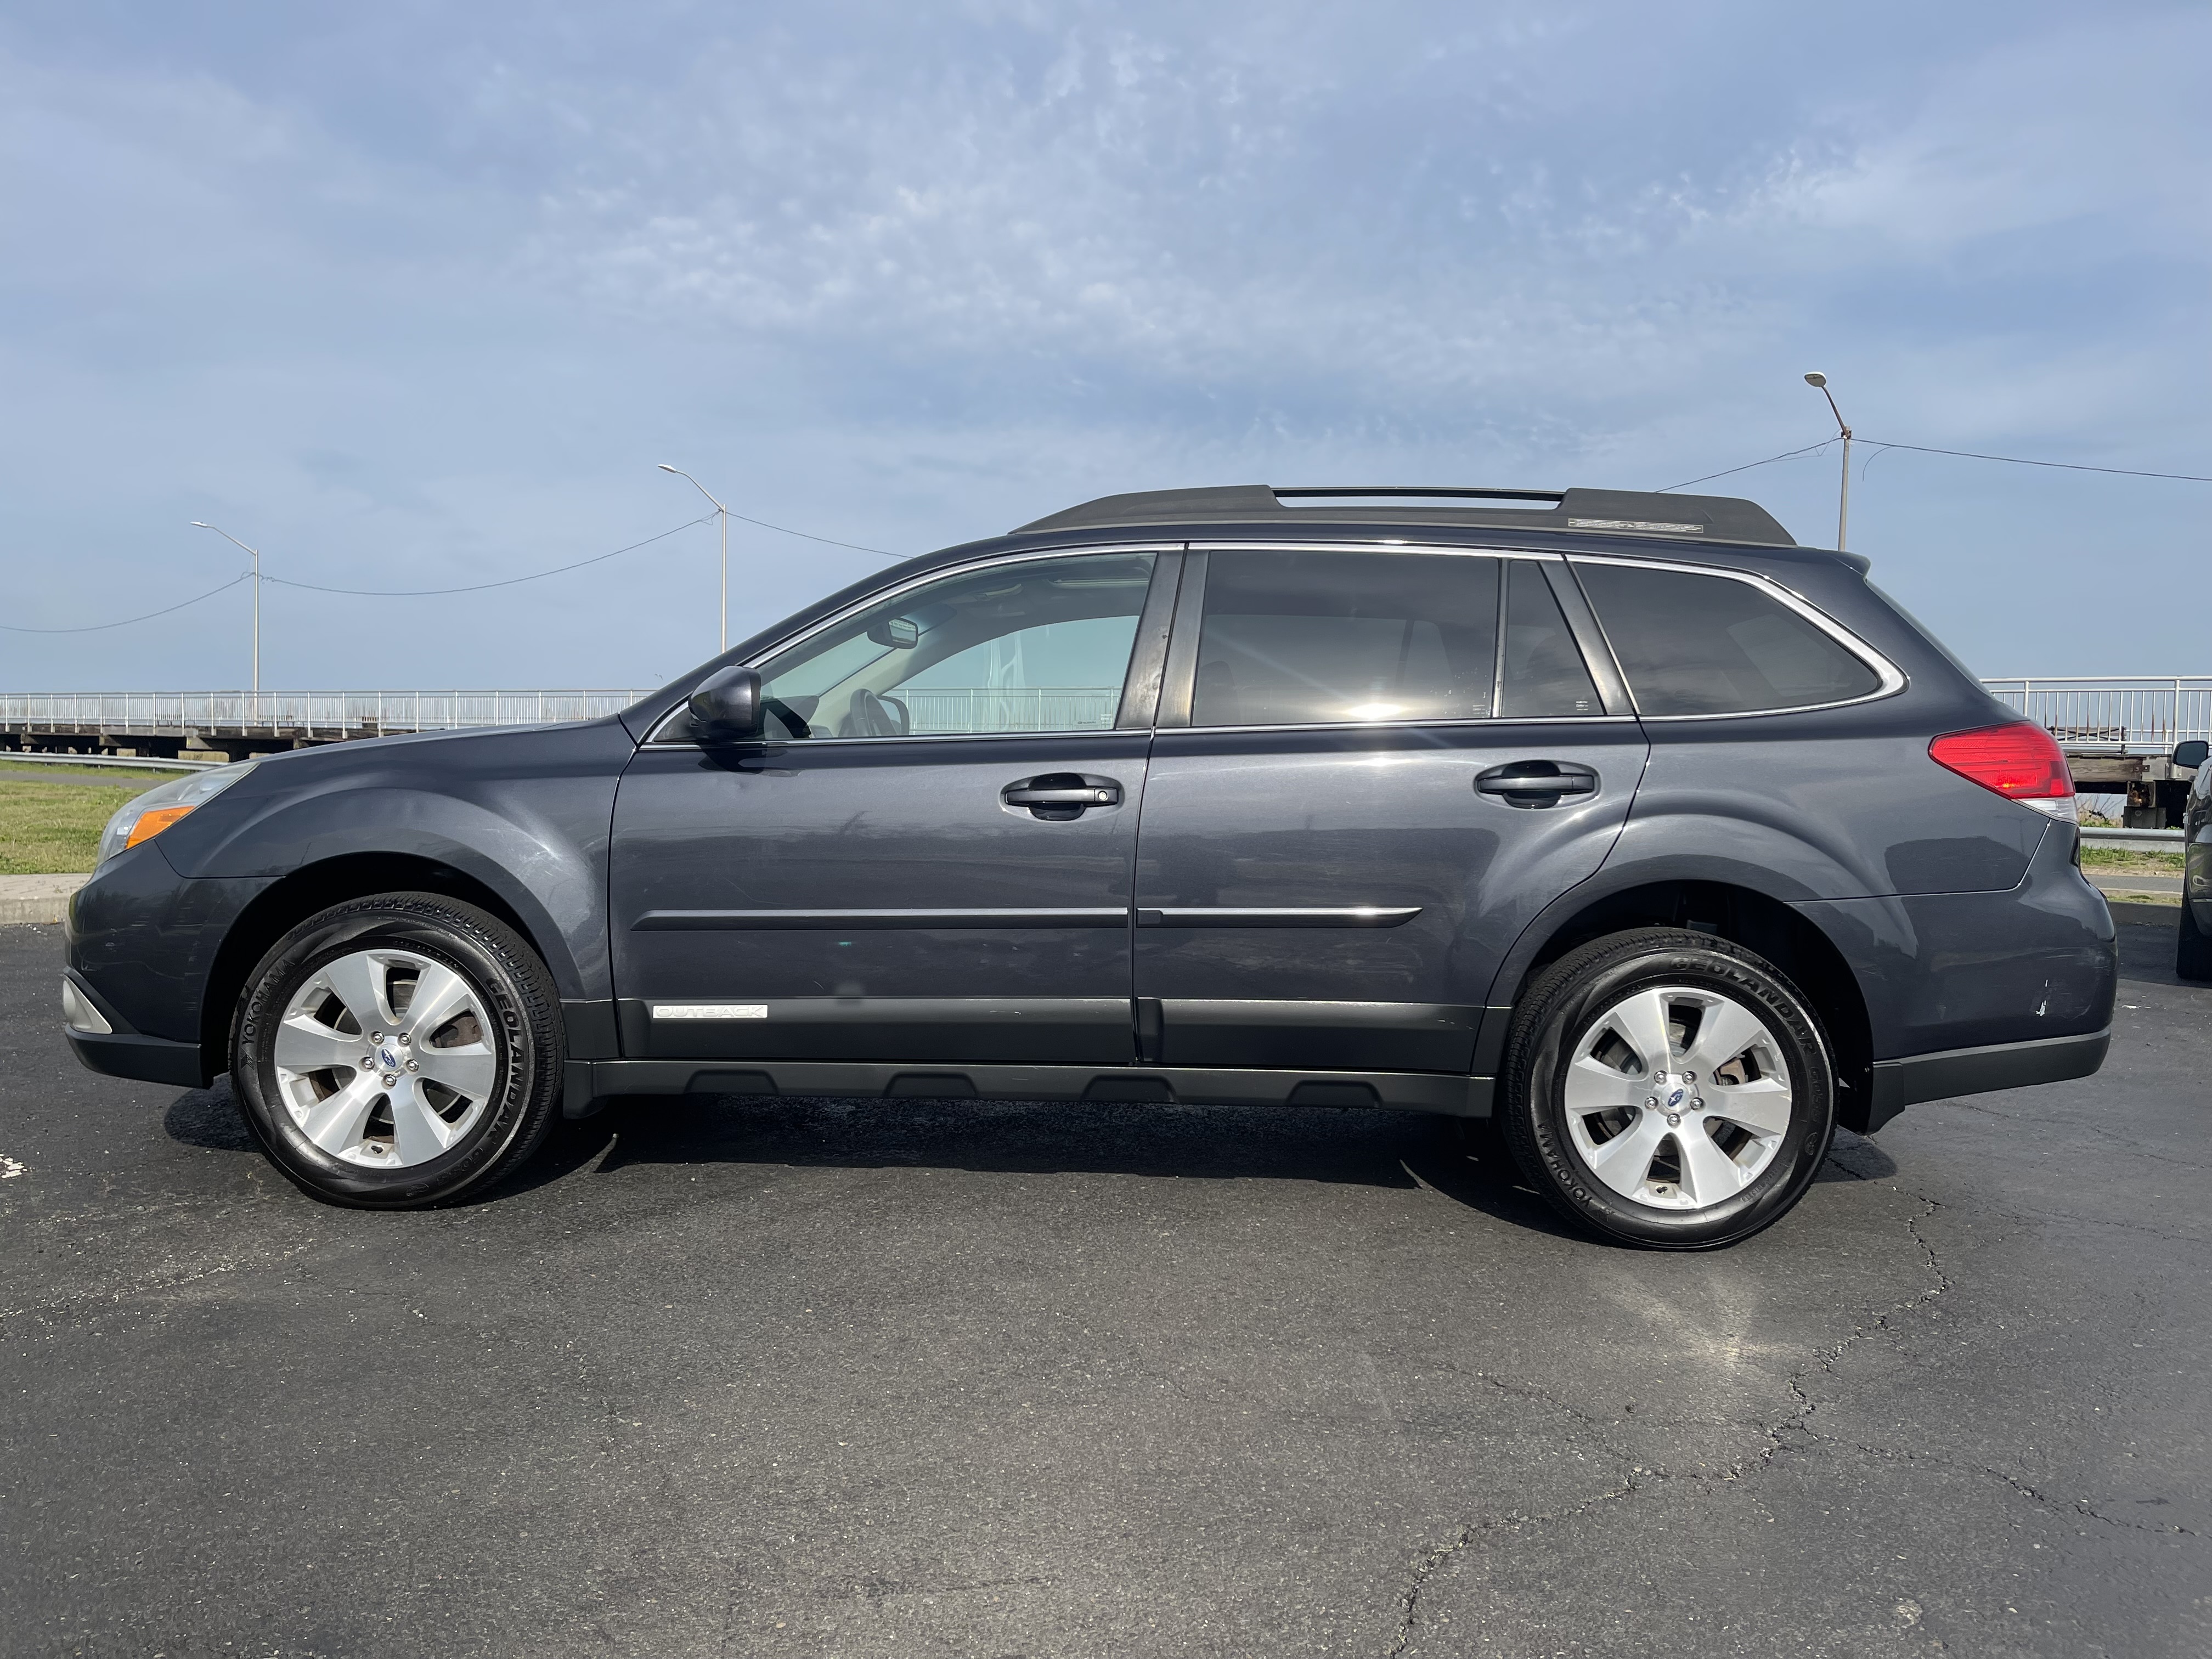 Used - Subaru Outback 3.6R Limited AWD Wagon for sale in Staten Island NY